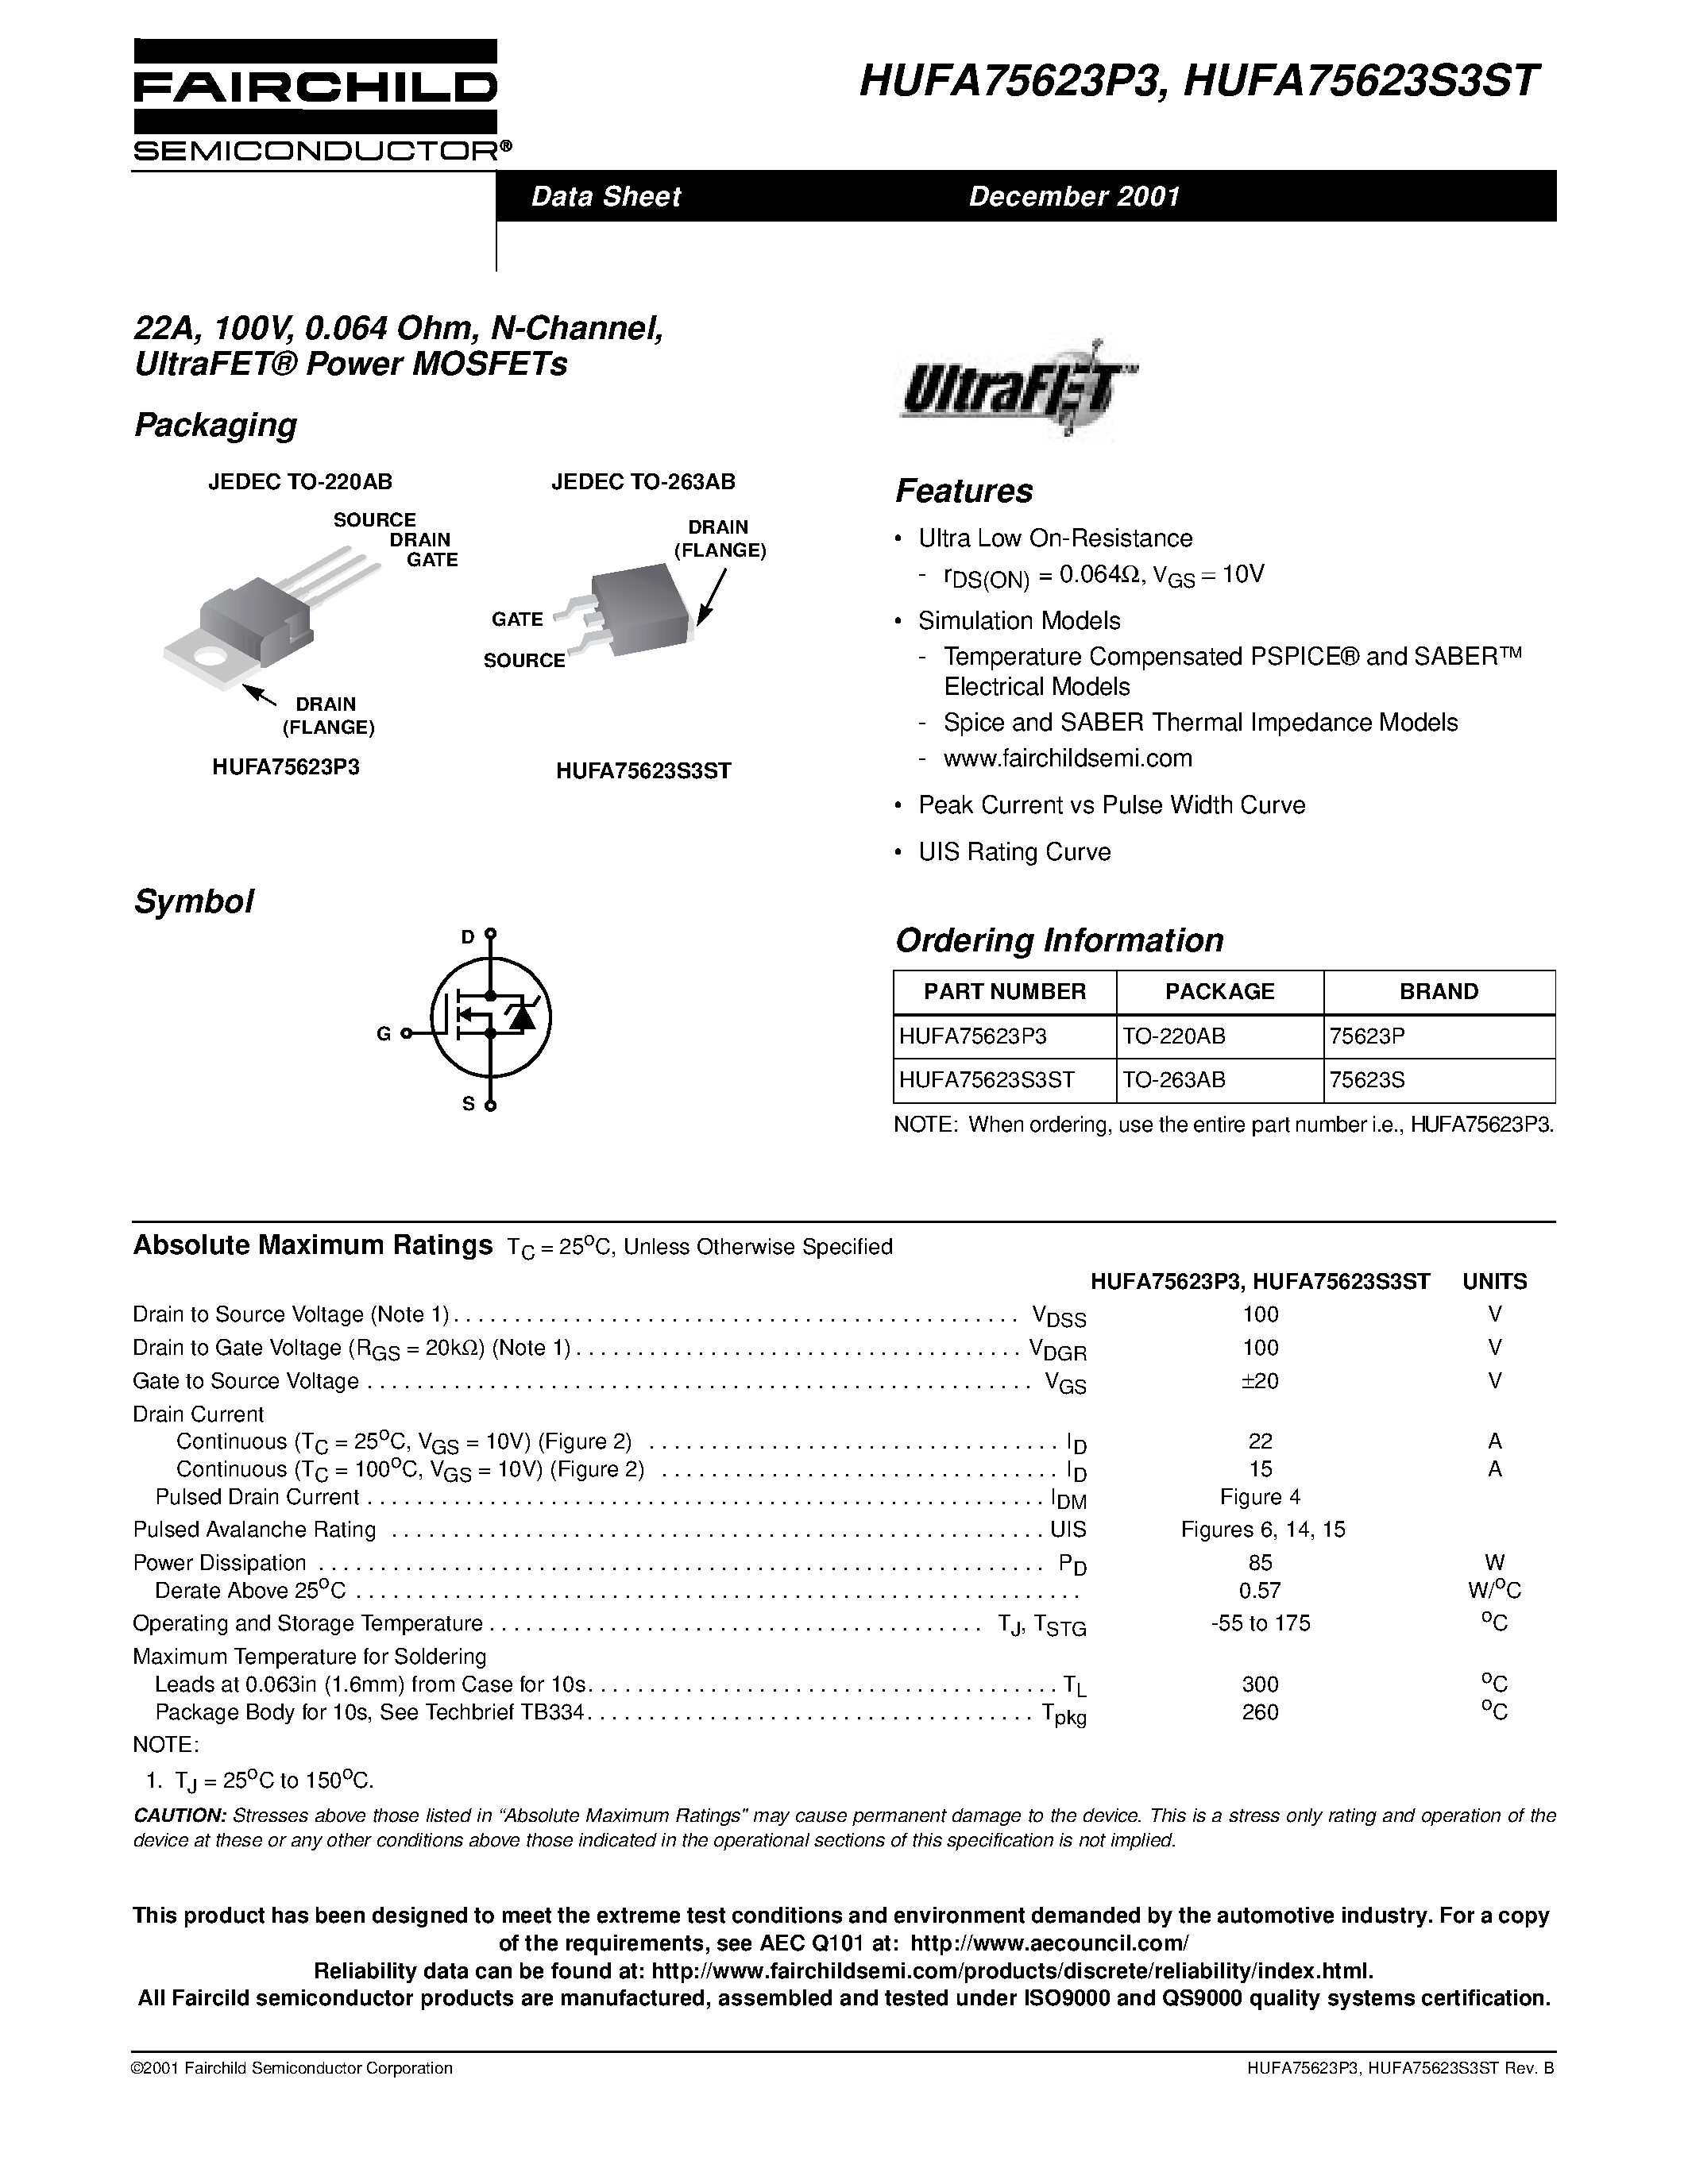 Datasheet HUFA75623S3ST - 22A/ 100V/ 0.064 Ohm/ N-Channel/ UltraFET Power MOSFETs page 1